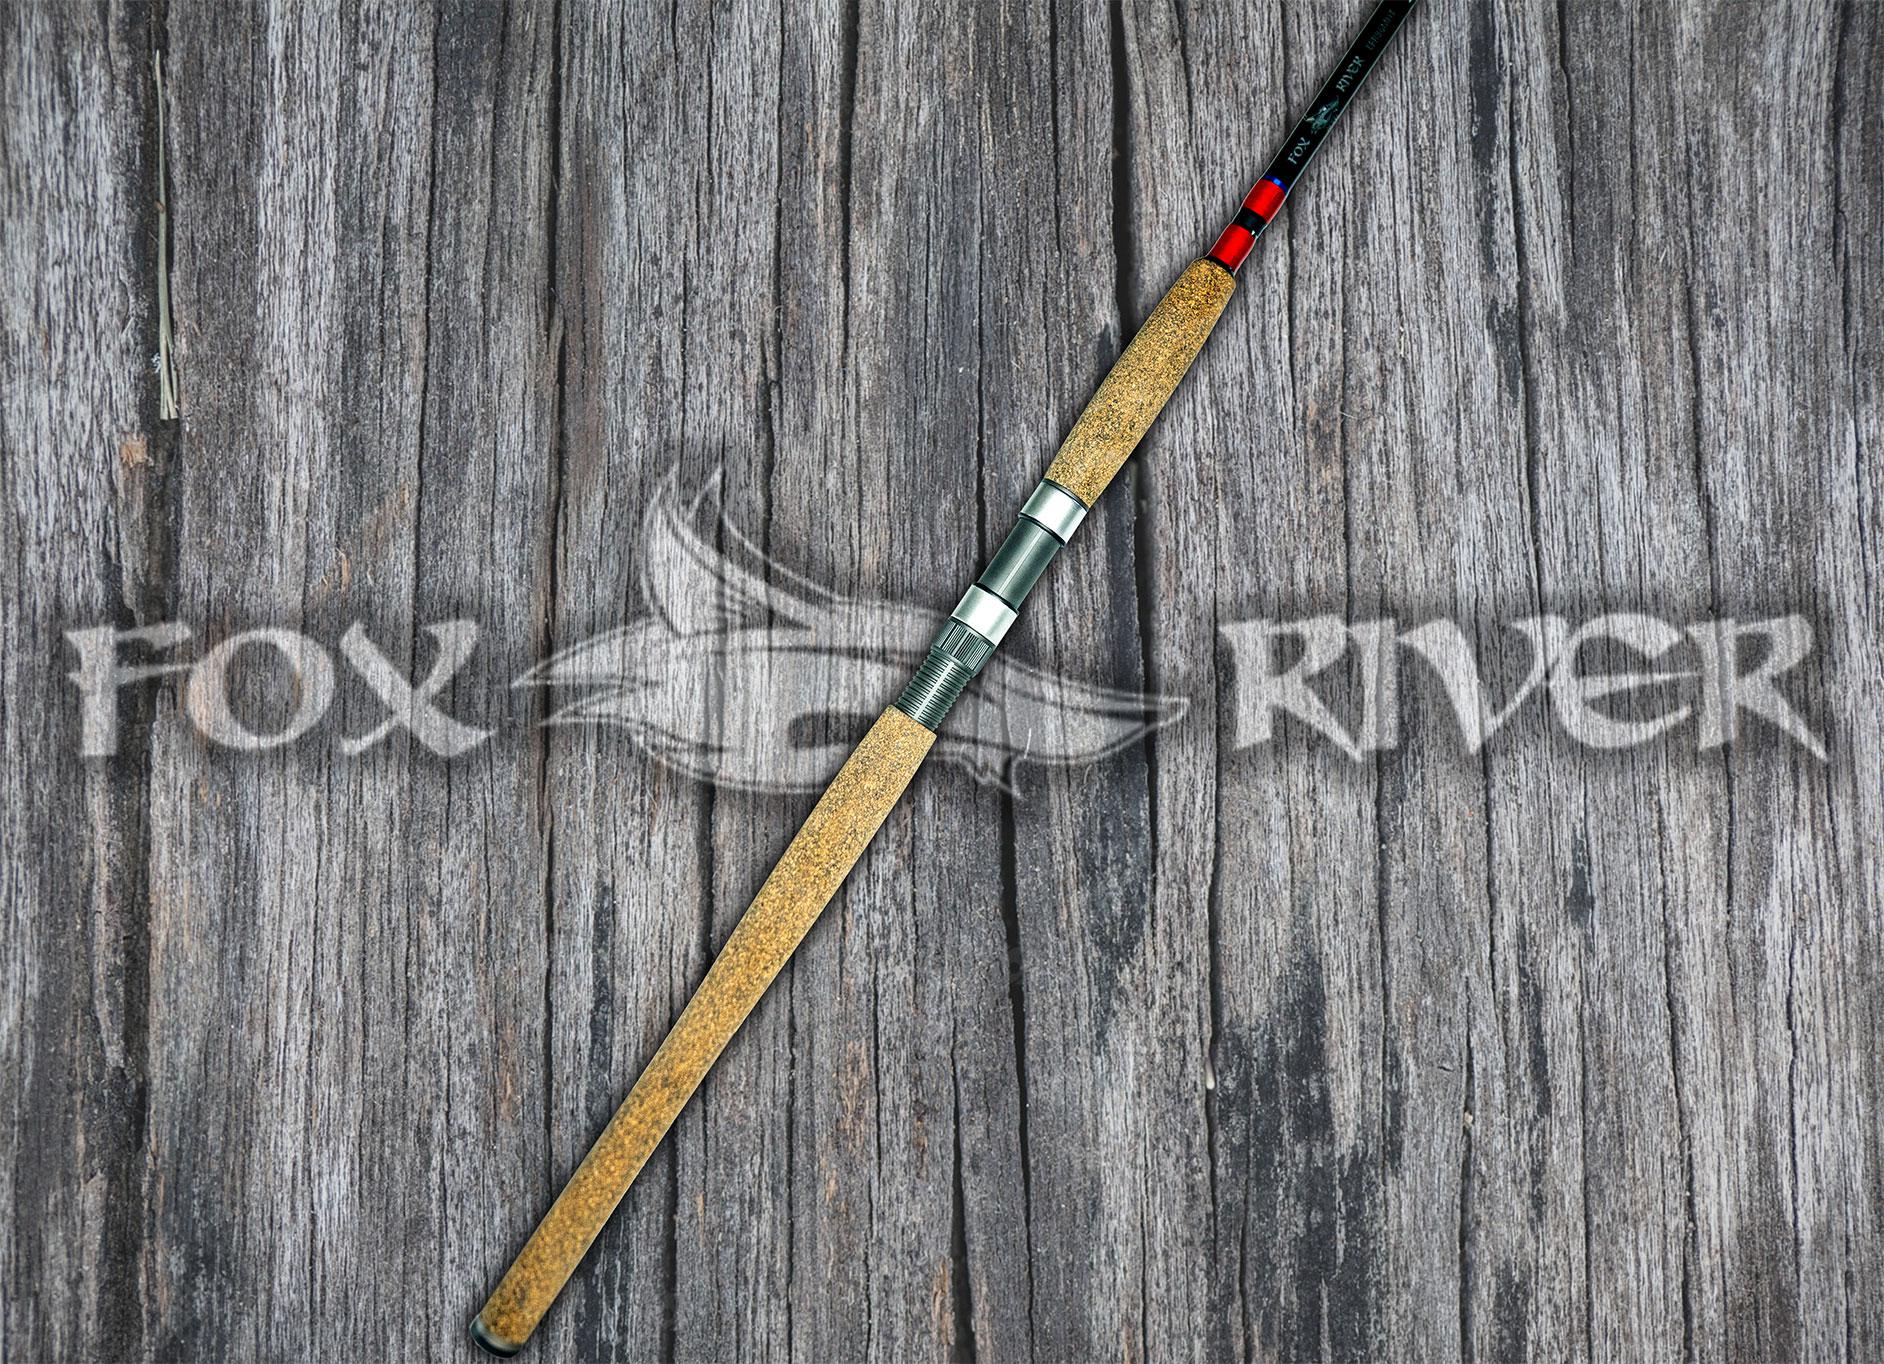 Fox River Lures and Rods - 8' 6 Medium Heavy Musky Trolling Rod